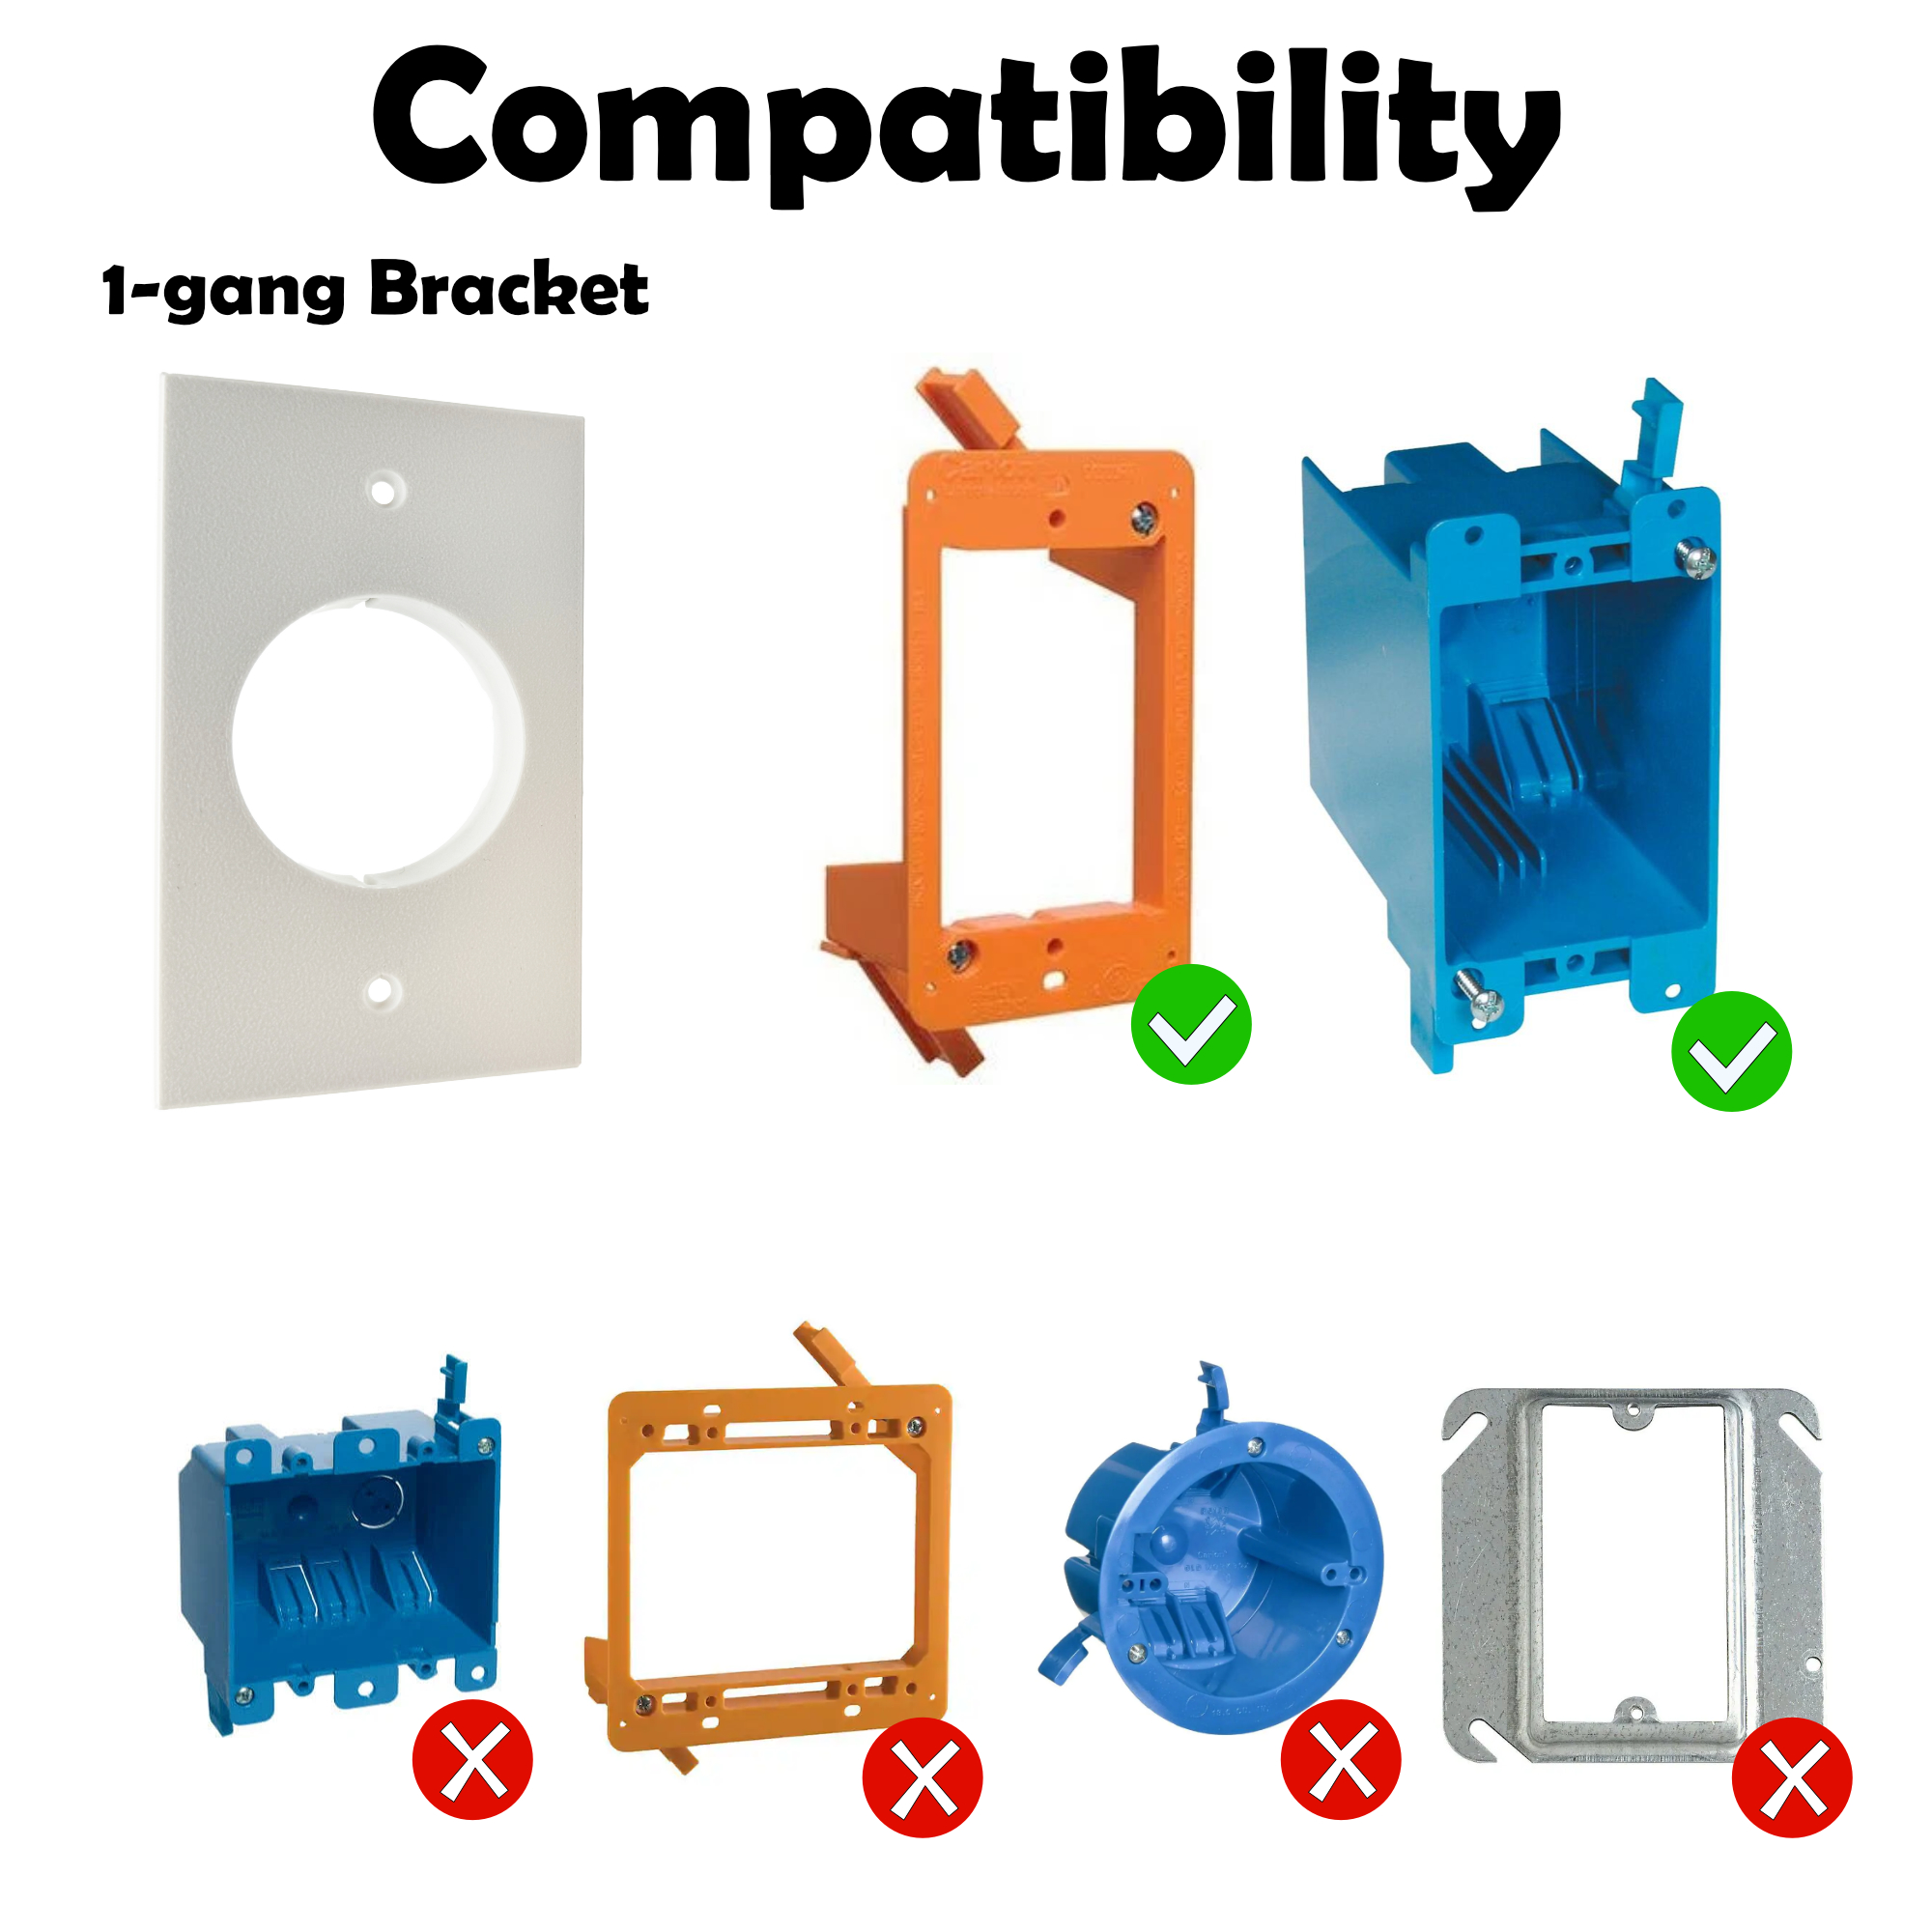 This bracket is compatible with 1-gang boxes and 1-gang low voltage brackets. It is not compatible with 2-gang boxes, 2-gang low-voltage brackets, round boxes, or 1-gang metal mud rings